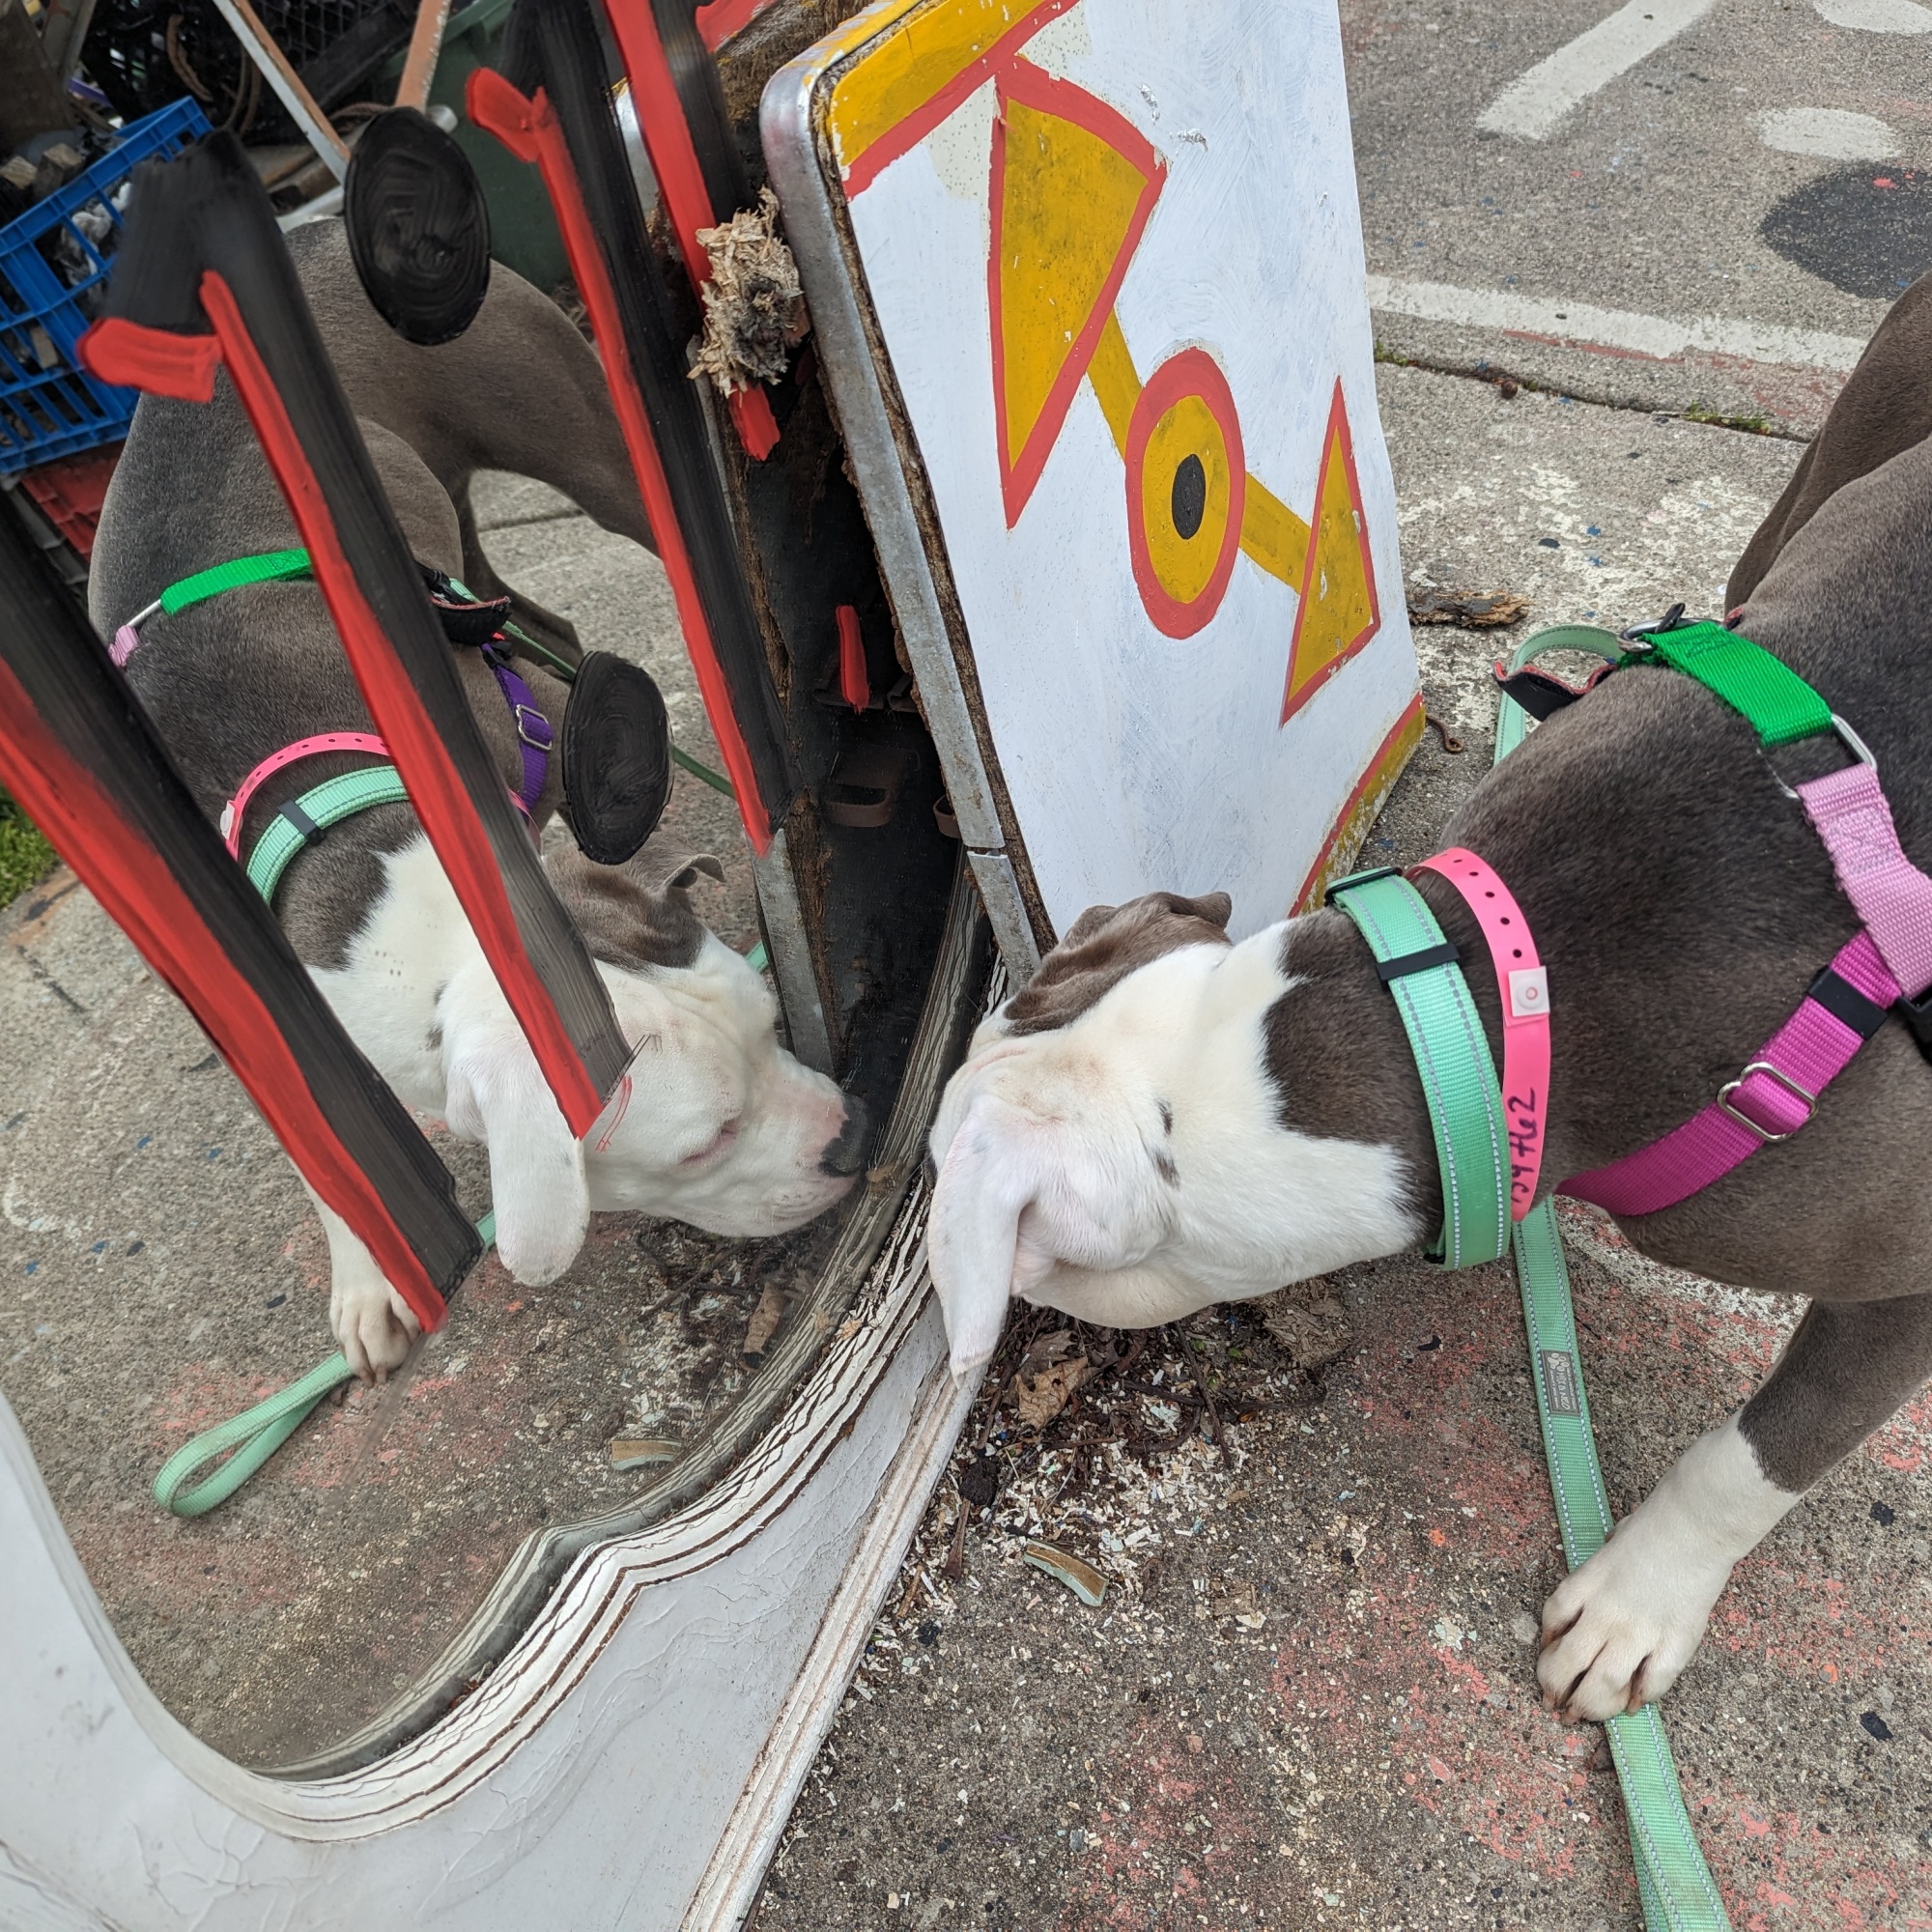 An image of Star, a white and gray pitbull, sniffing a colorful mirror.